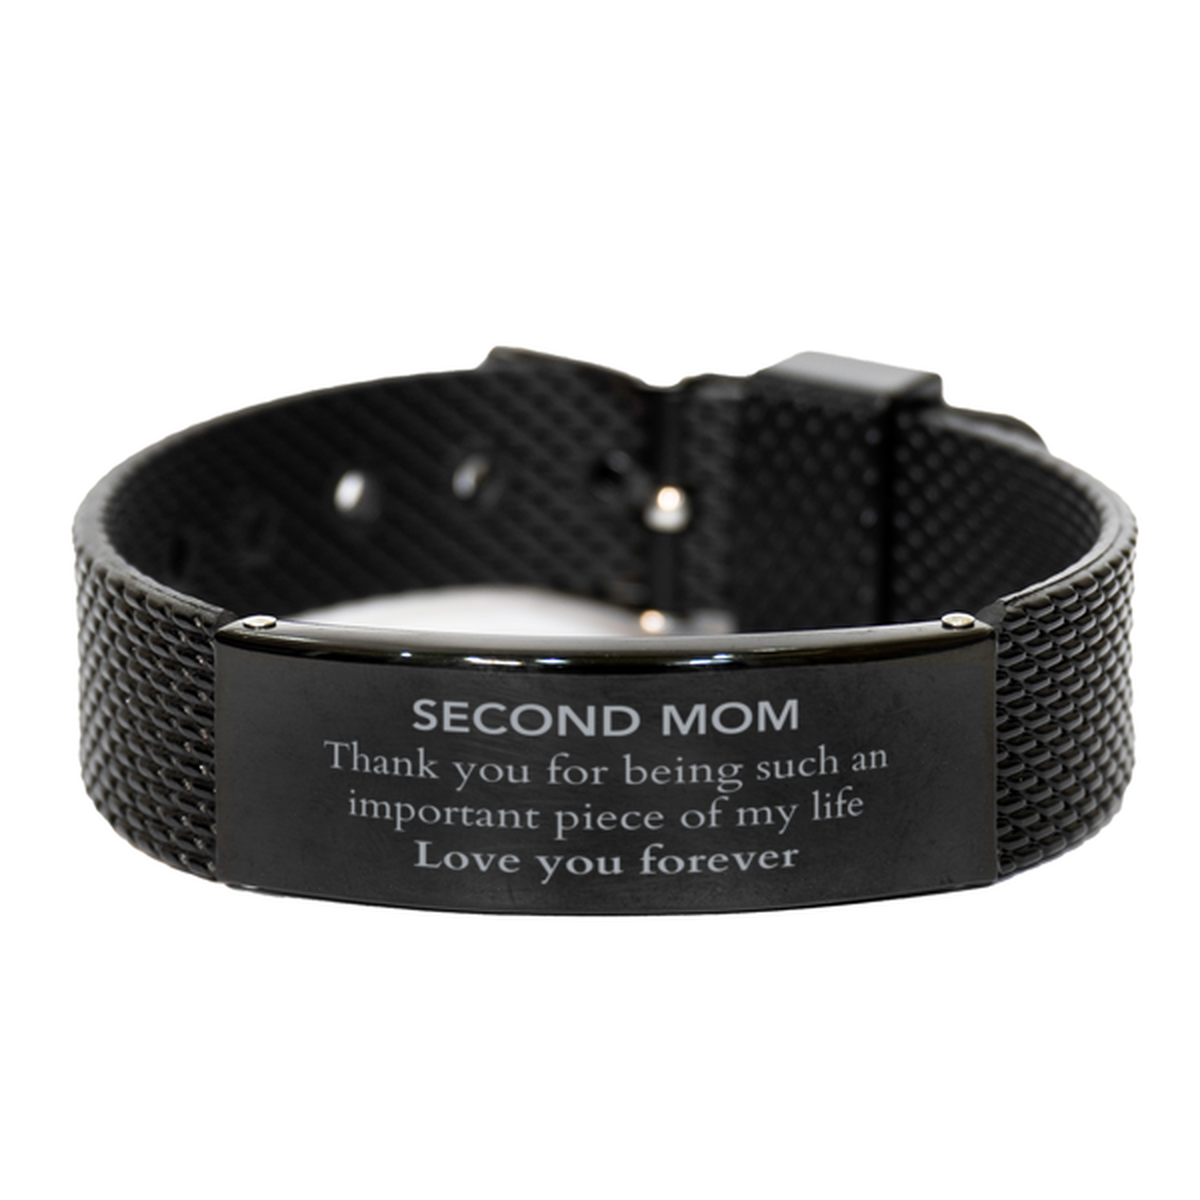 Appropriate Second Mom Black Shark Mesh Bracelet Epic Birthday Gifts for Second Mom Thank you for being such an important piece of my life Second Mom Christmas Mothers Fathers Day